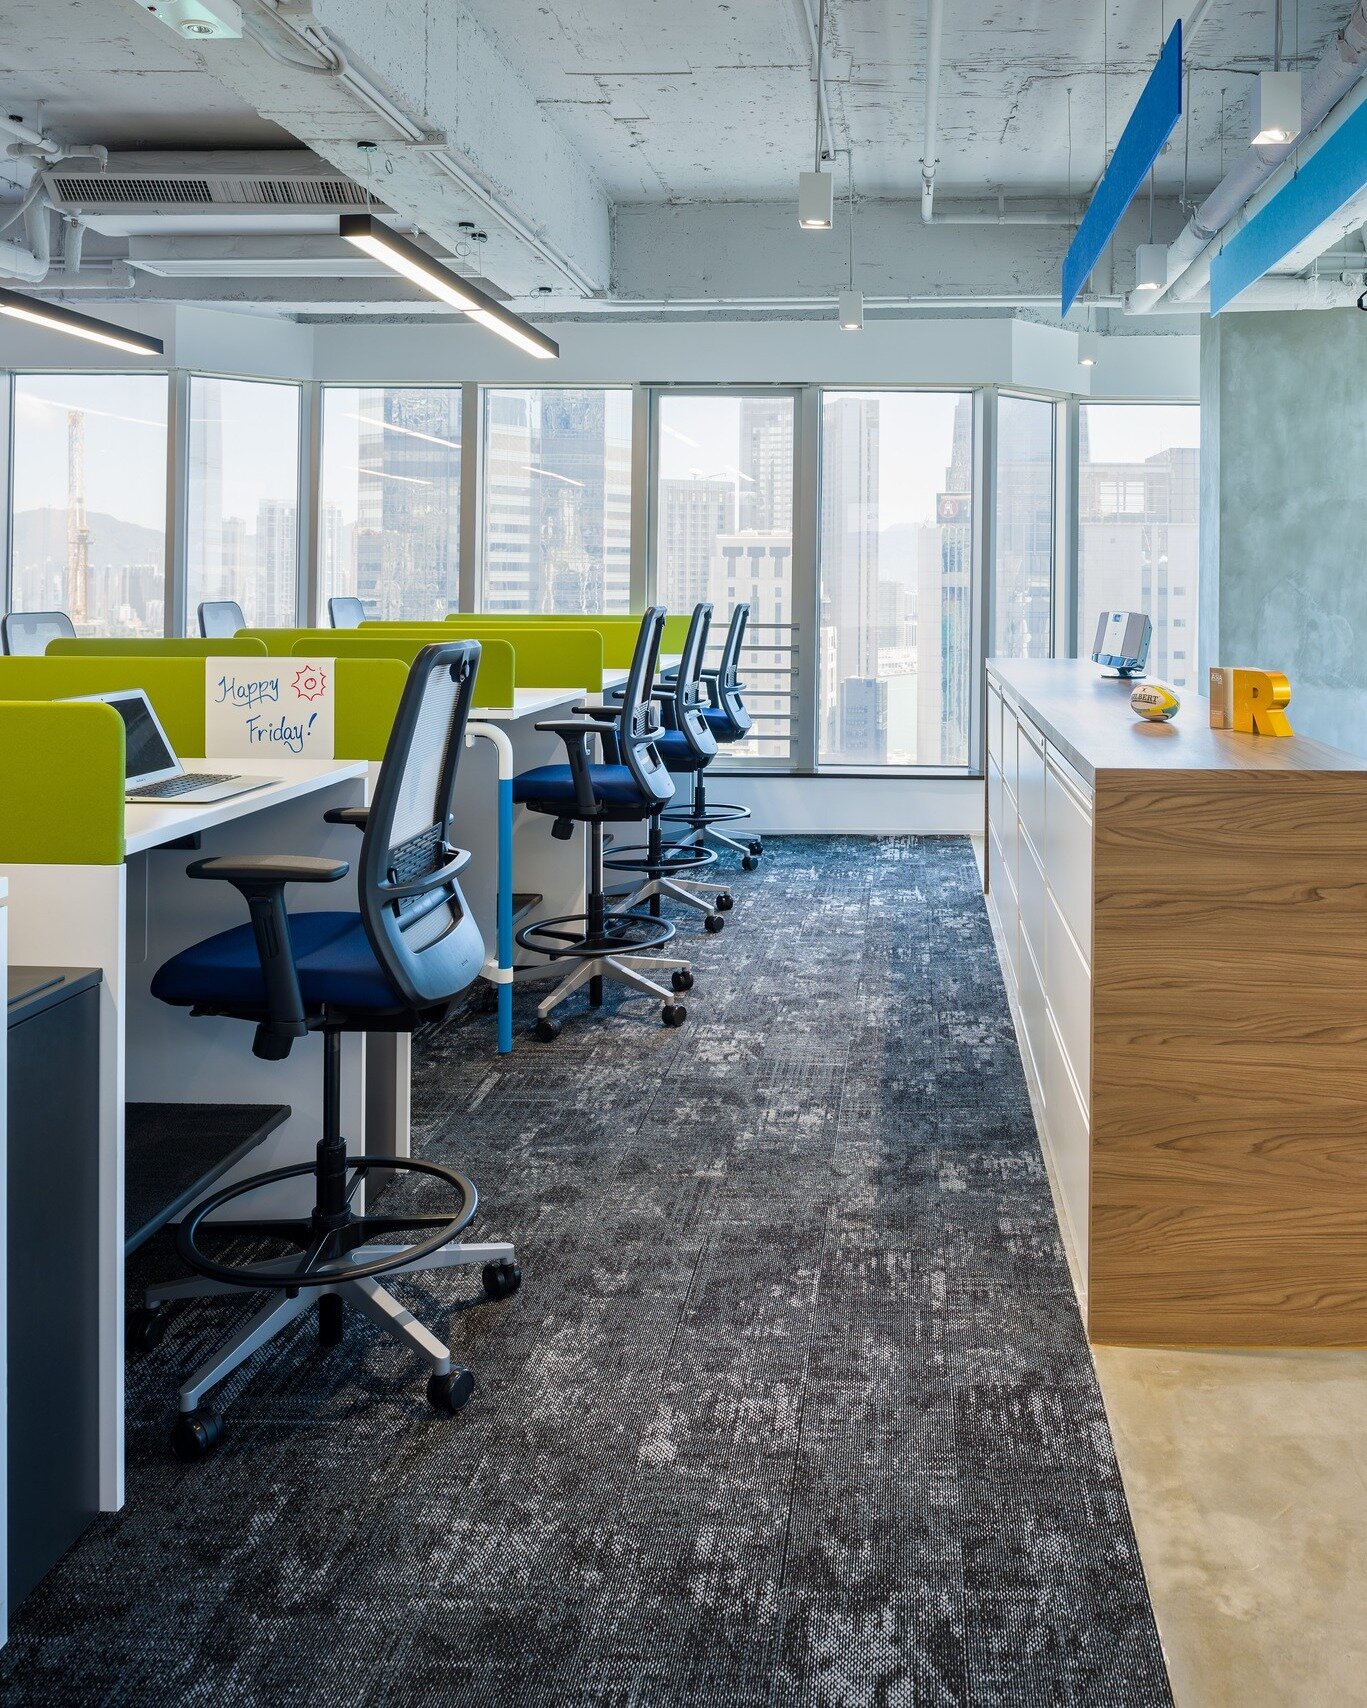 Depending on the function of the office area, different chairs can cater to different needs. Dedicated work desks where users will sit for long periods require ergonomic chairs with good back support, whereas hot desks need only be comfortable for us